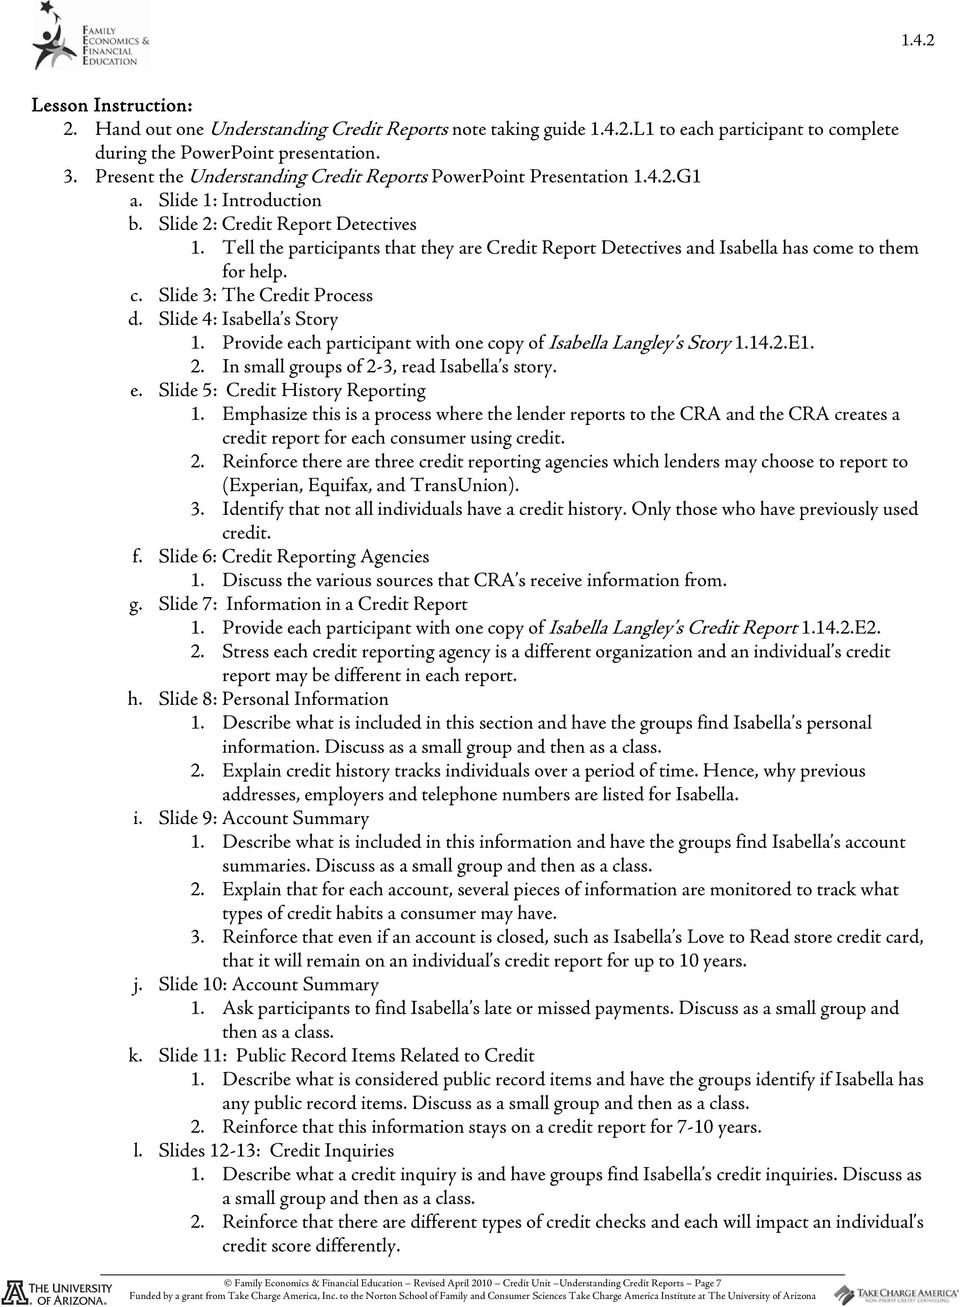 Printables Of Isabella S Combined Credit Report Worksheet Answers Inside Isabella039S Combined Credit Report Worksheet Answer Key